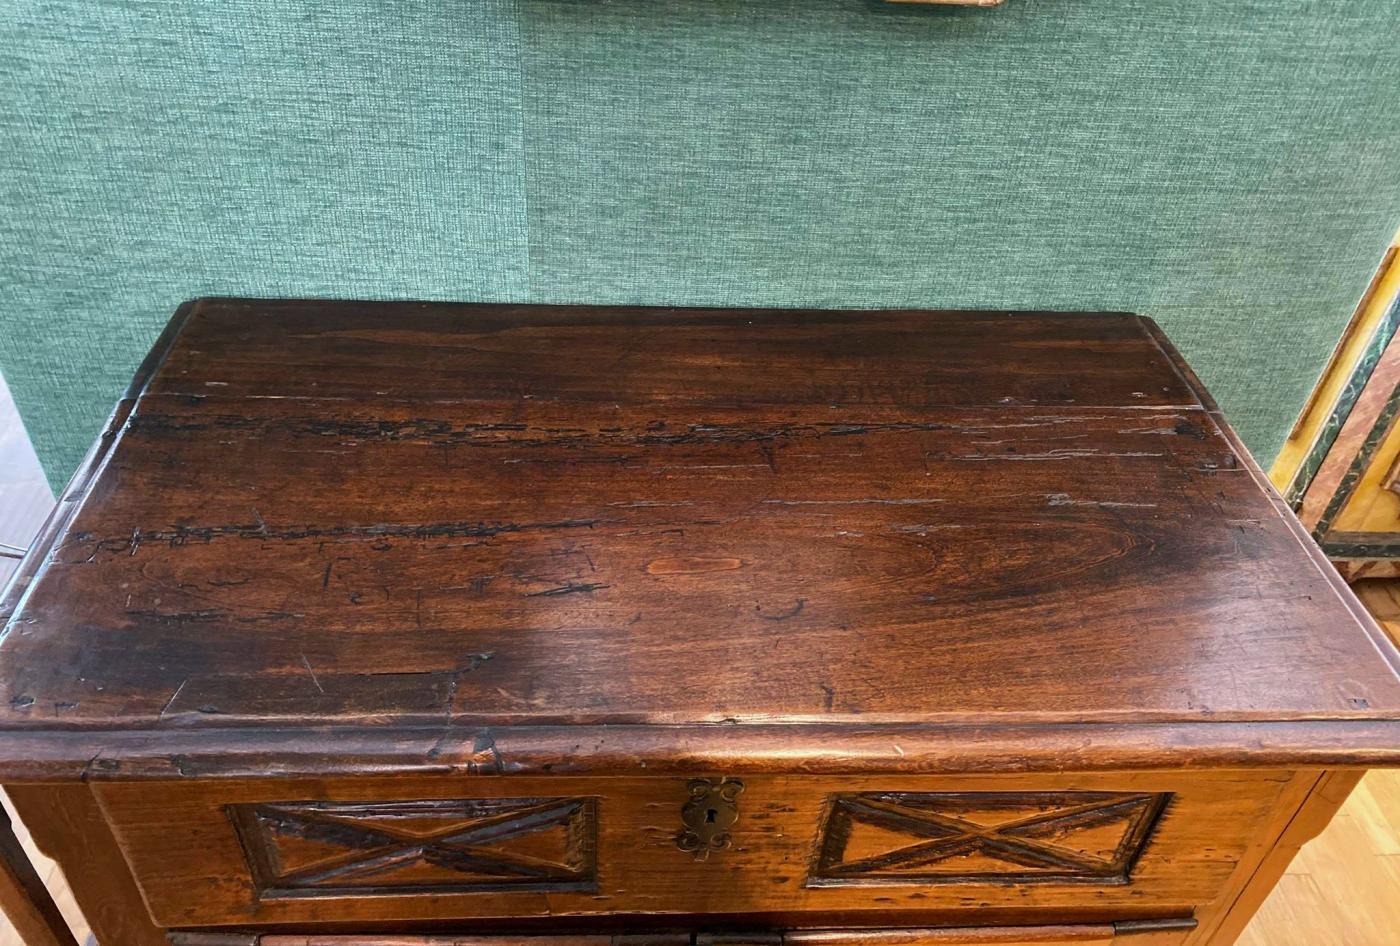 Rectangular top with molded edge over a long drawer, above a pair of paneled doors carved with diamond-shaped motifs, raised on plinth base.